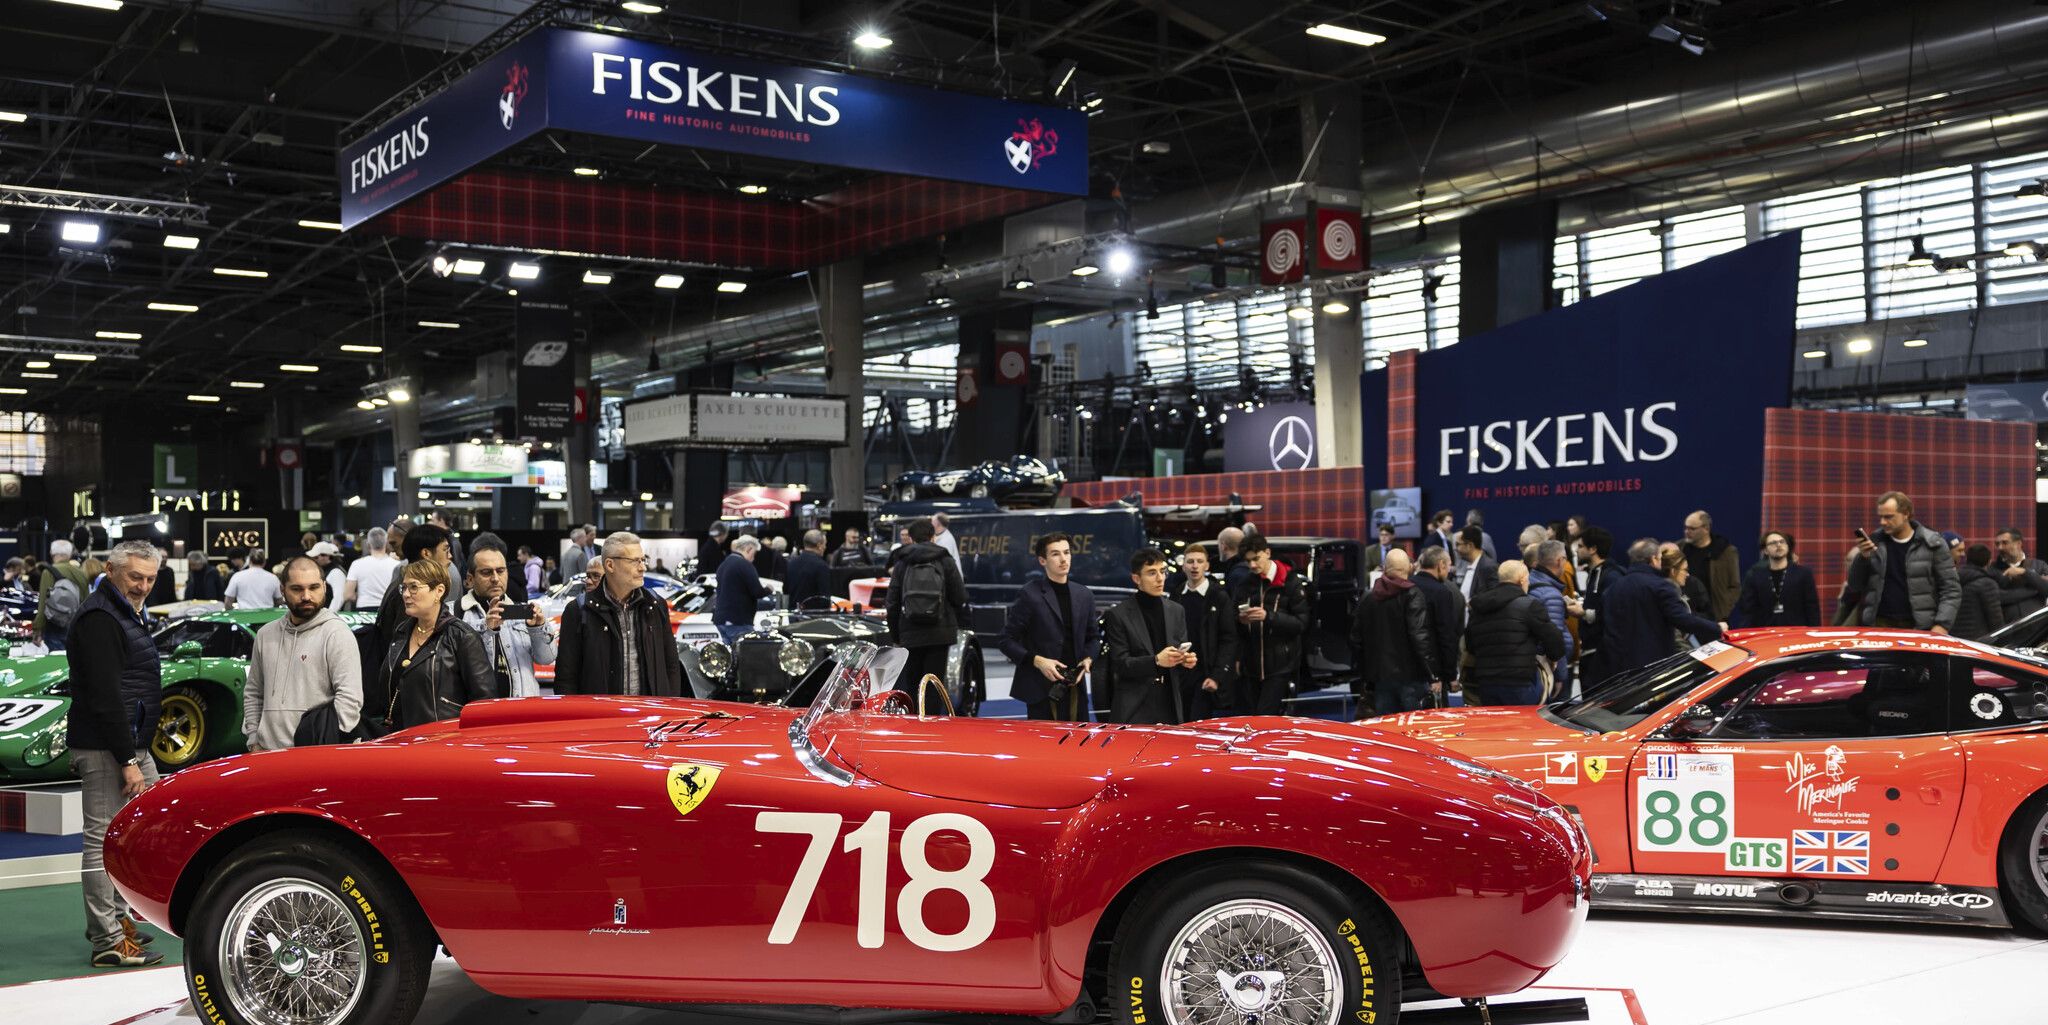 Retromobile Is Like a French Version of Pebble, Hershey, and Scottsdale—All Wrapped in One